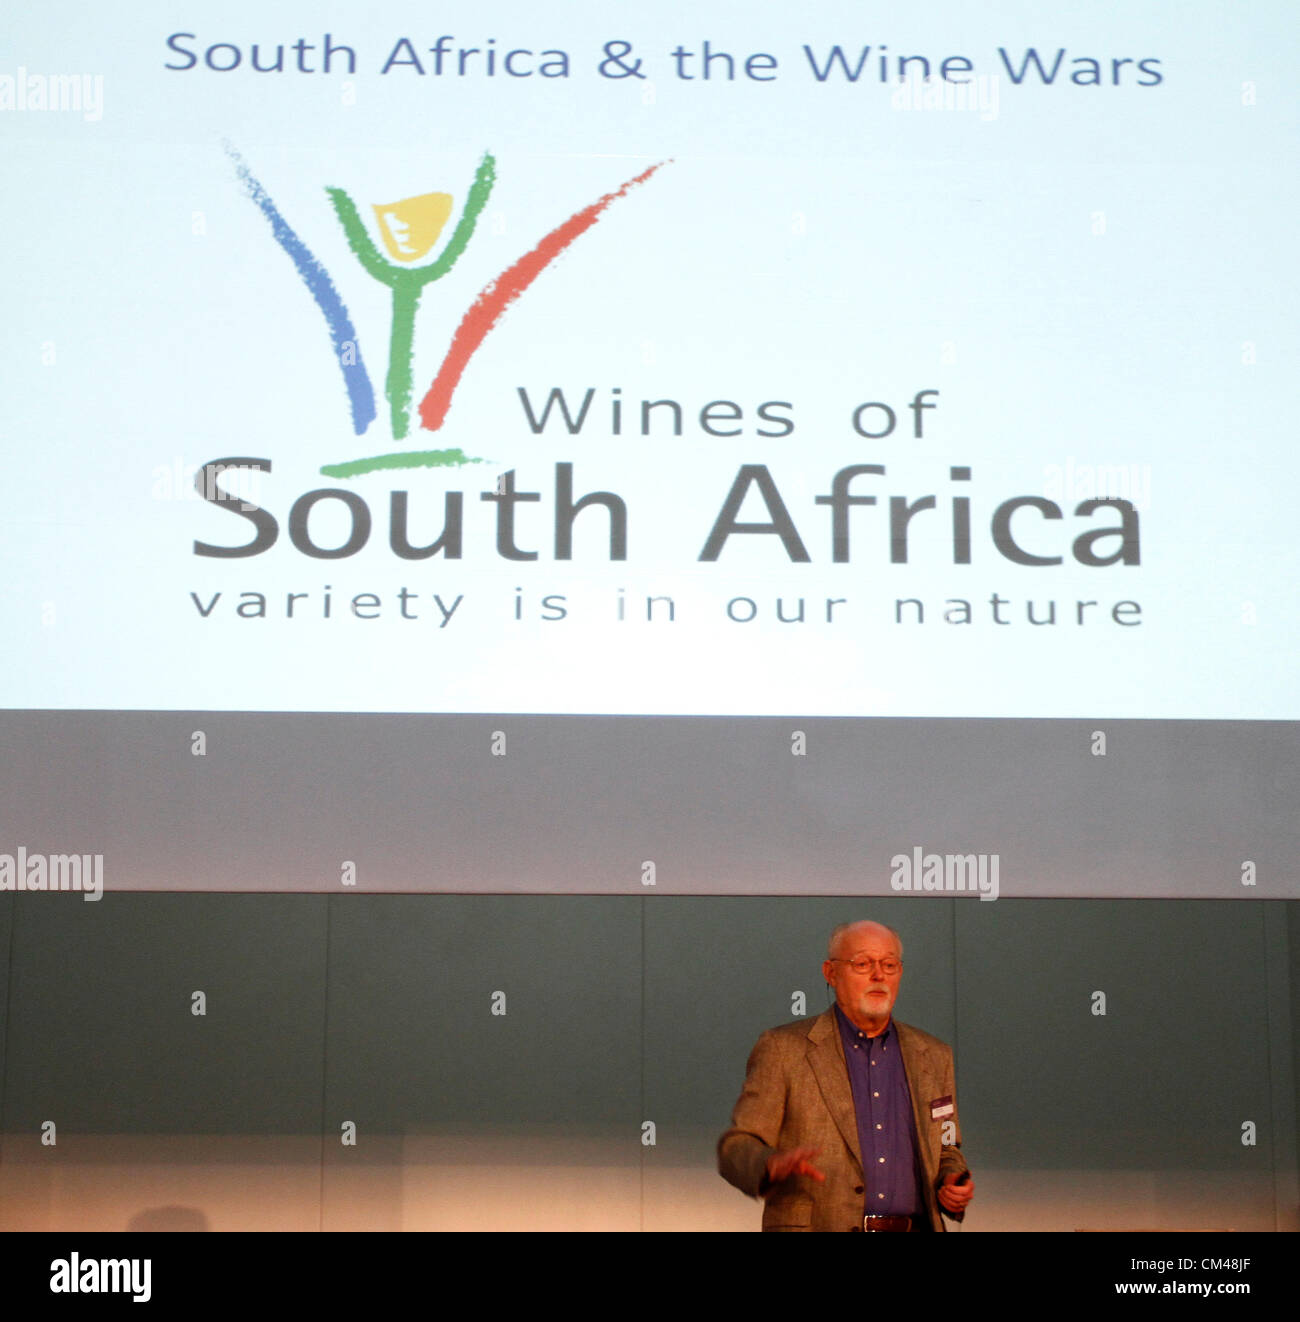 Prof Mike Veseth, author of Wine Wars, delivers the keynote speech at the Annual Nederburg Wine Auction, Paarl, South Africa, 29 September 2012. Veseth spoke about the competitiveness of the wine industry and global opportunities for South African wine producers. Stock Photo